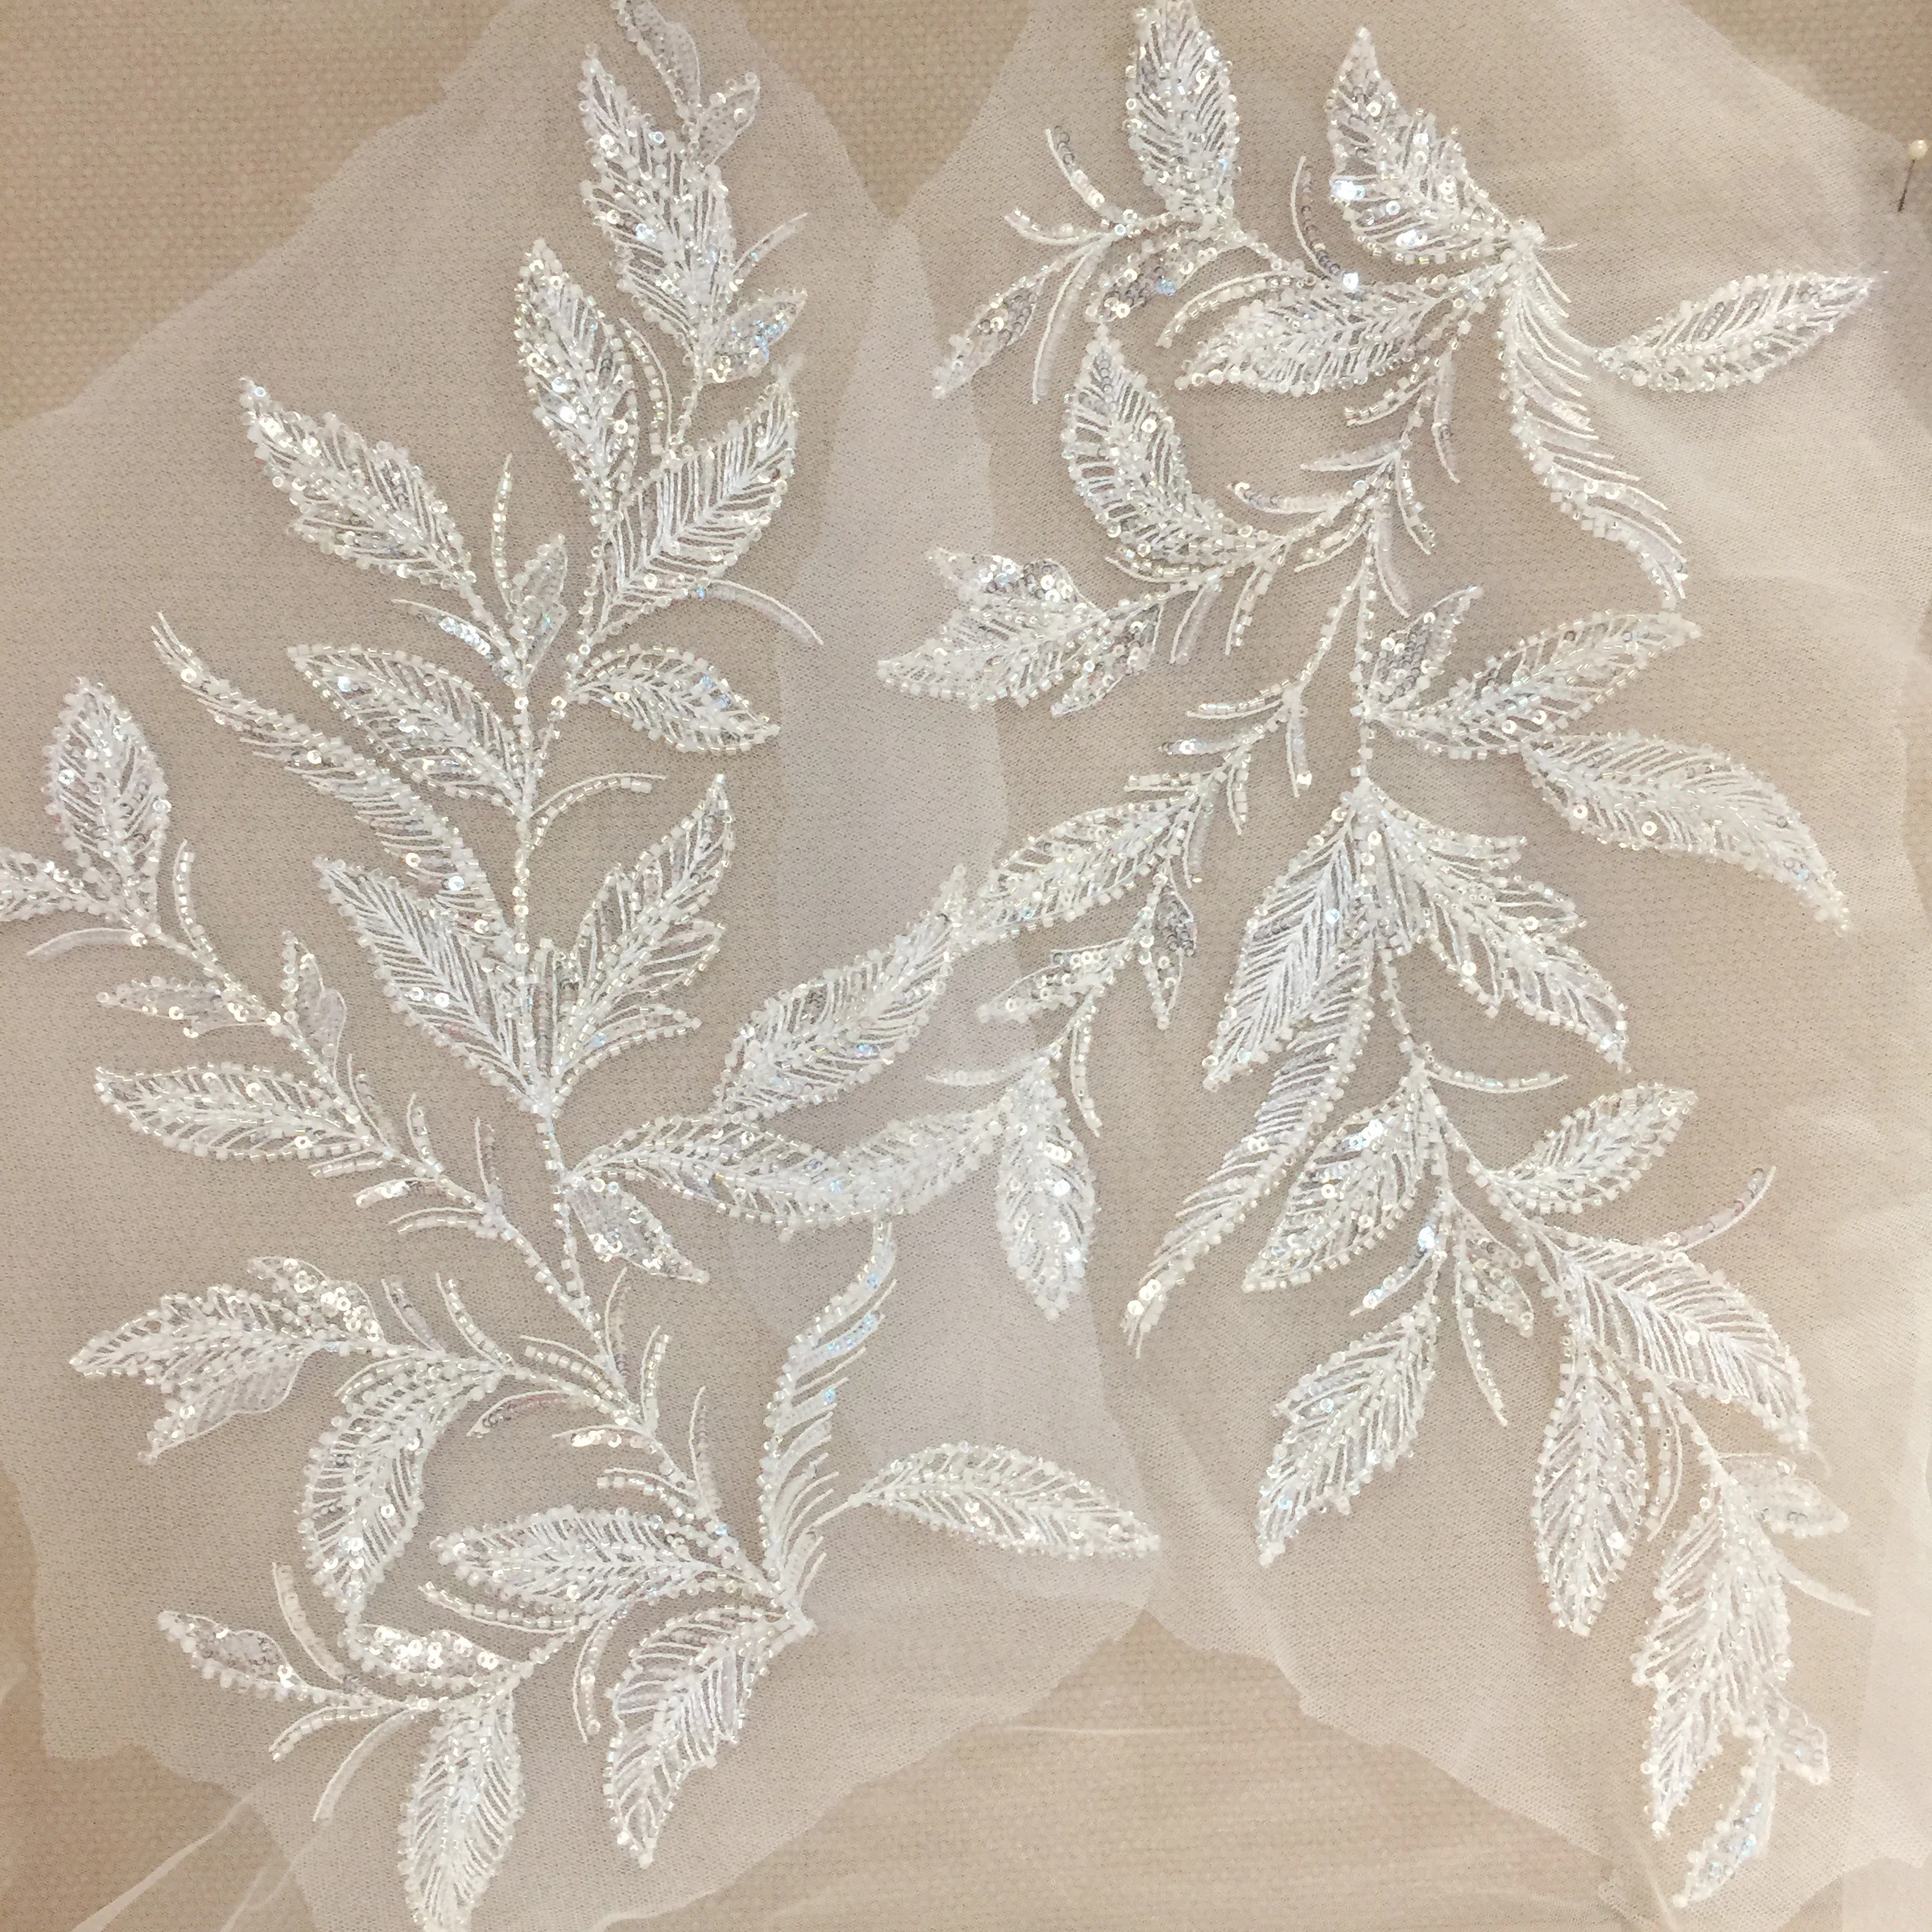 7.5"x2.75" Ivory Bridal Beaded Sequins Embroidery Motif Applique by Pair 